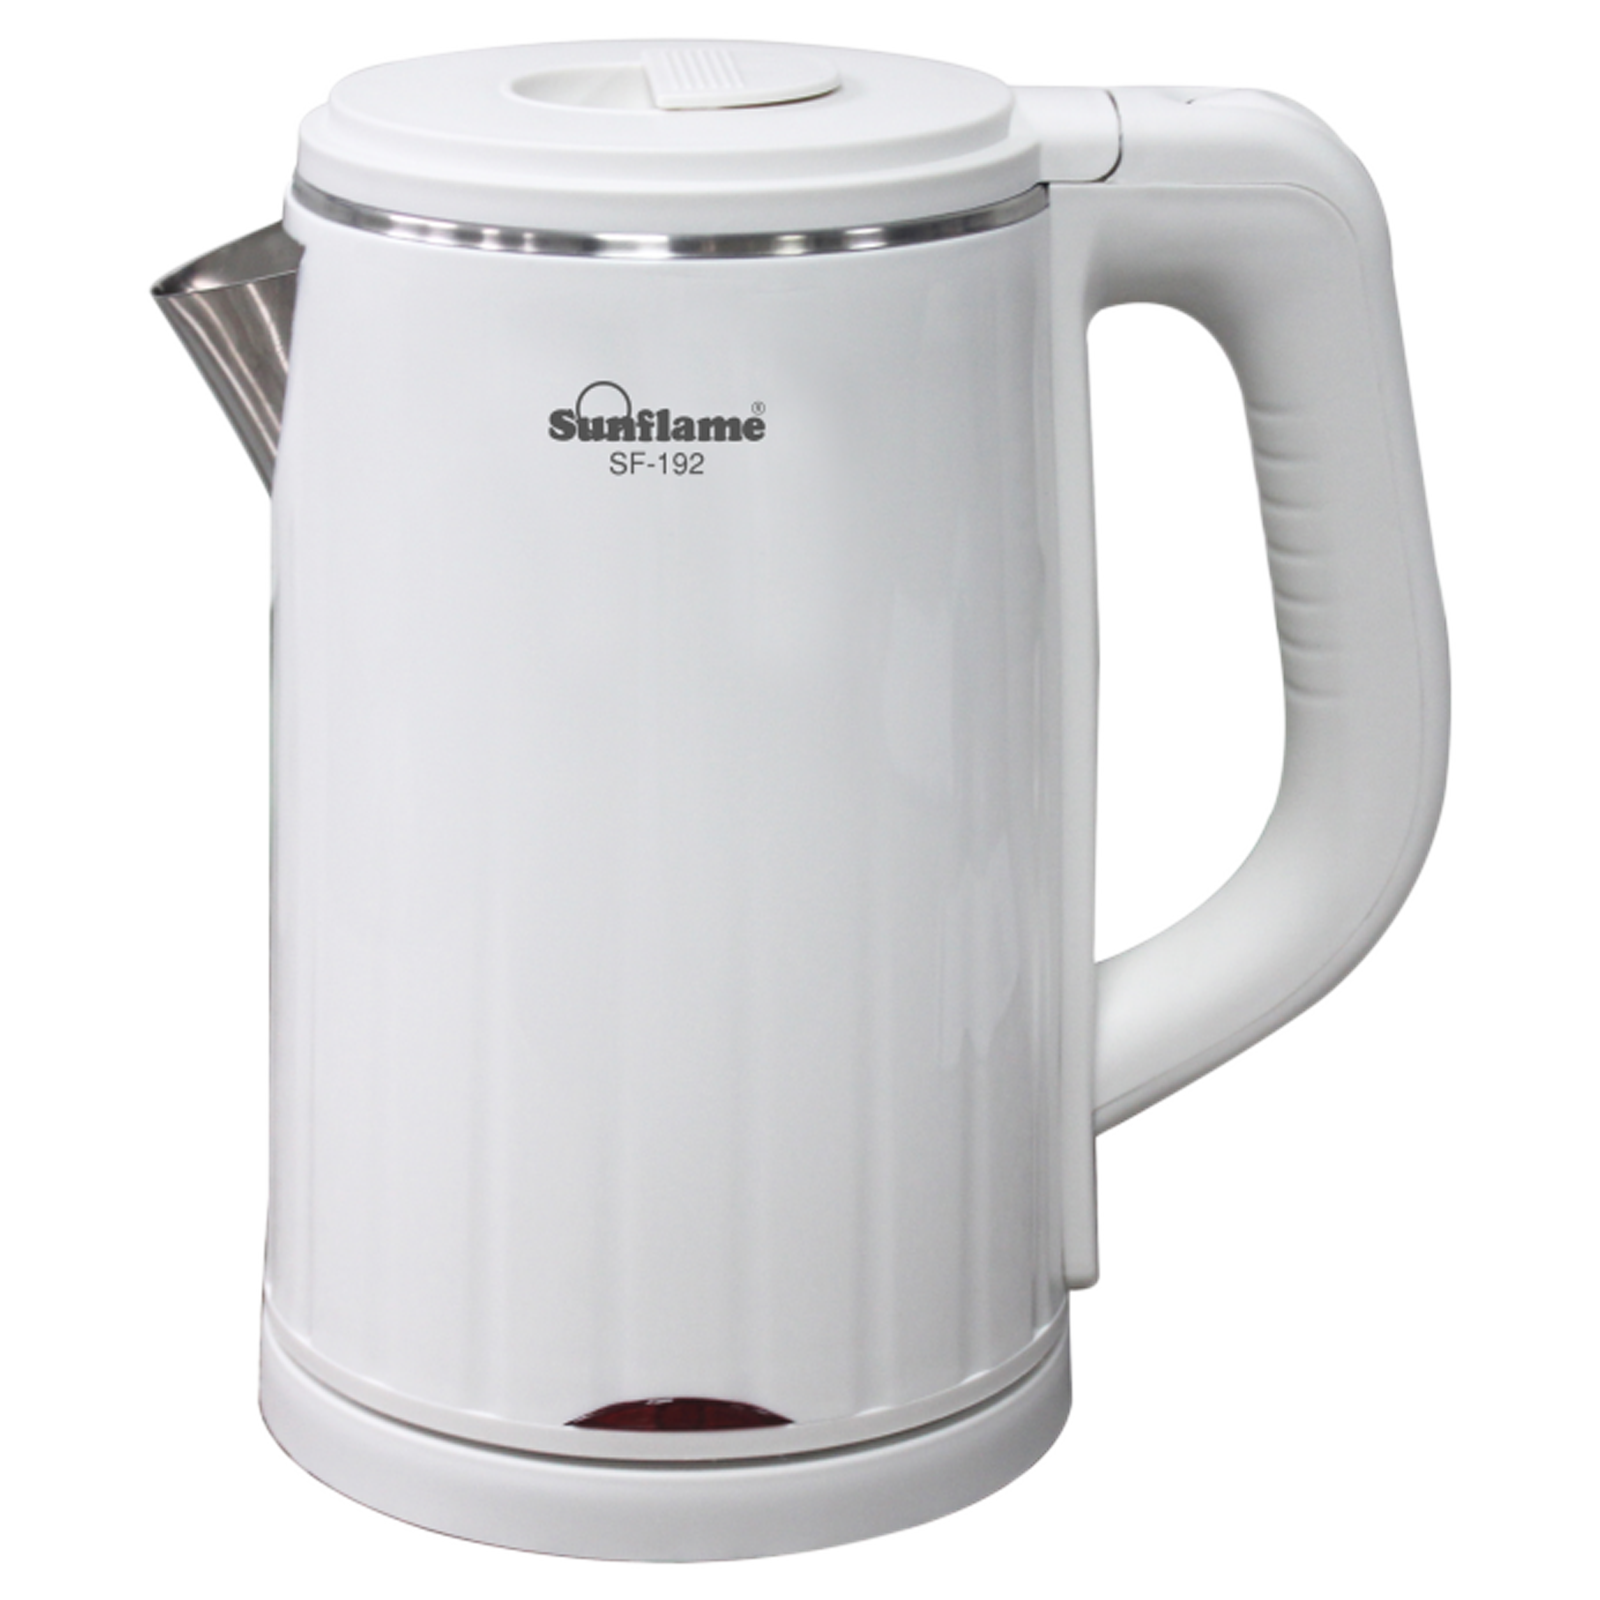 Sunflame 1.2L 1500 Watts Electric Kettle (Variable Temperature Control, SF-192, White)_1